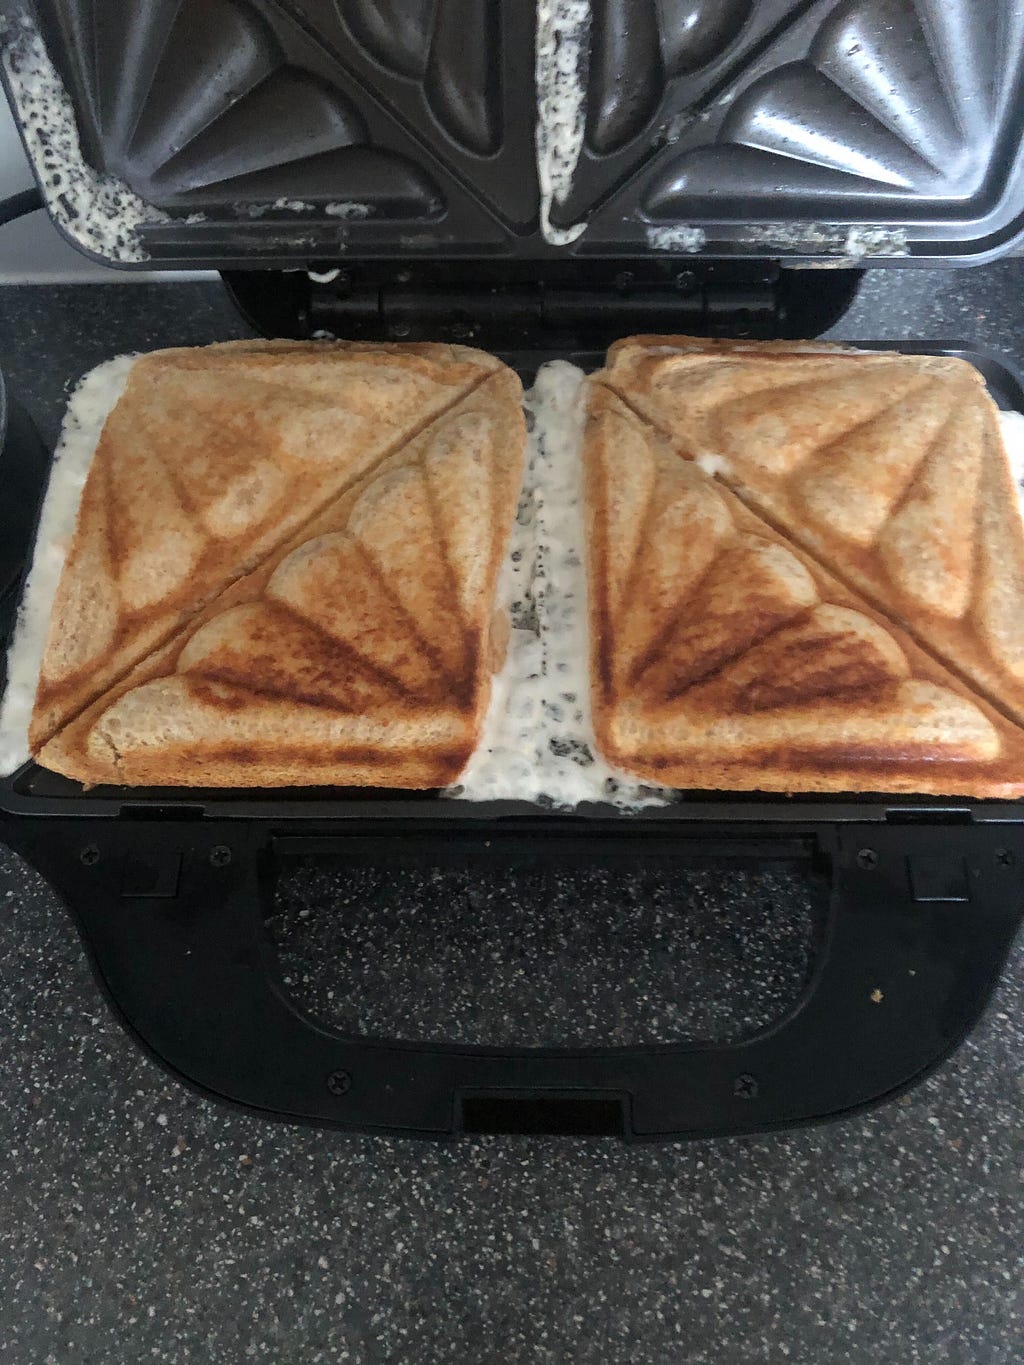 A toastie sandwich machine with two sandwiches leaking the filling all over the machine, leaving a mess.